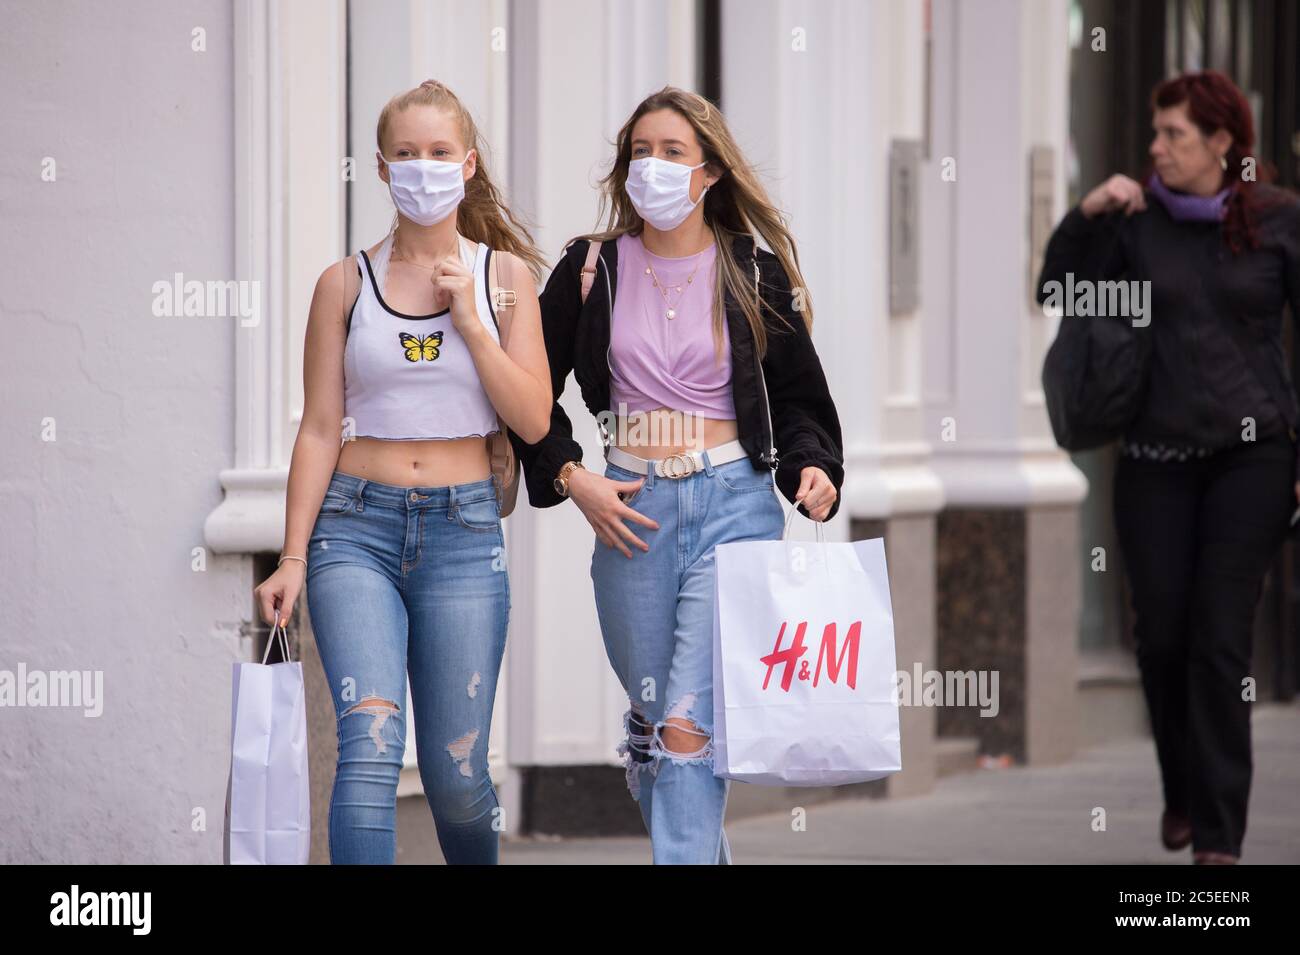 Glasgow, Scotland, UK. 2nd July, 2020. Pictured: Scenes from Glasgows style mile, Buchanan Street shopping area, where more people are seen wearing face masks or home made face coverings. Nicola Sturgeon announced earlier today that wearing a face covering is to become mandatory in shops from 10th July next week. Face coverings are already mandatory when taking public transport in a bid to slow down the spread of coronavirus. Credit: Colin Fisher/Alamy Live News Stock Photo